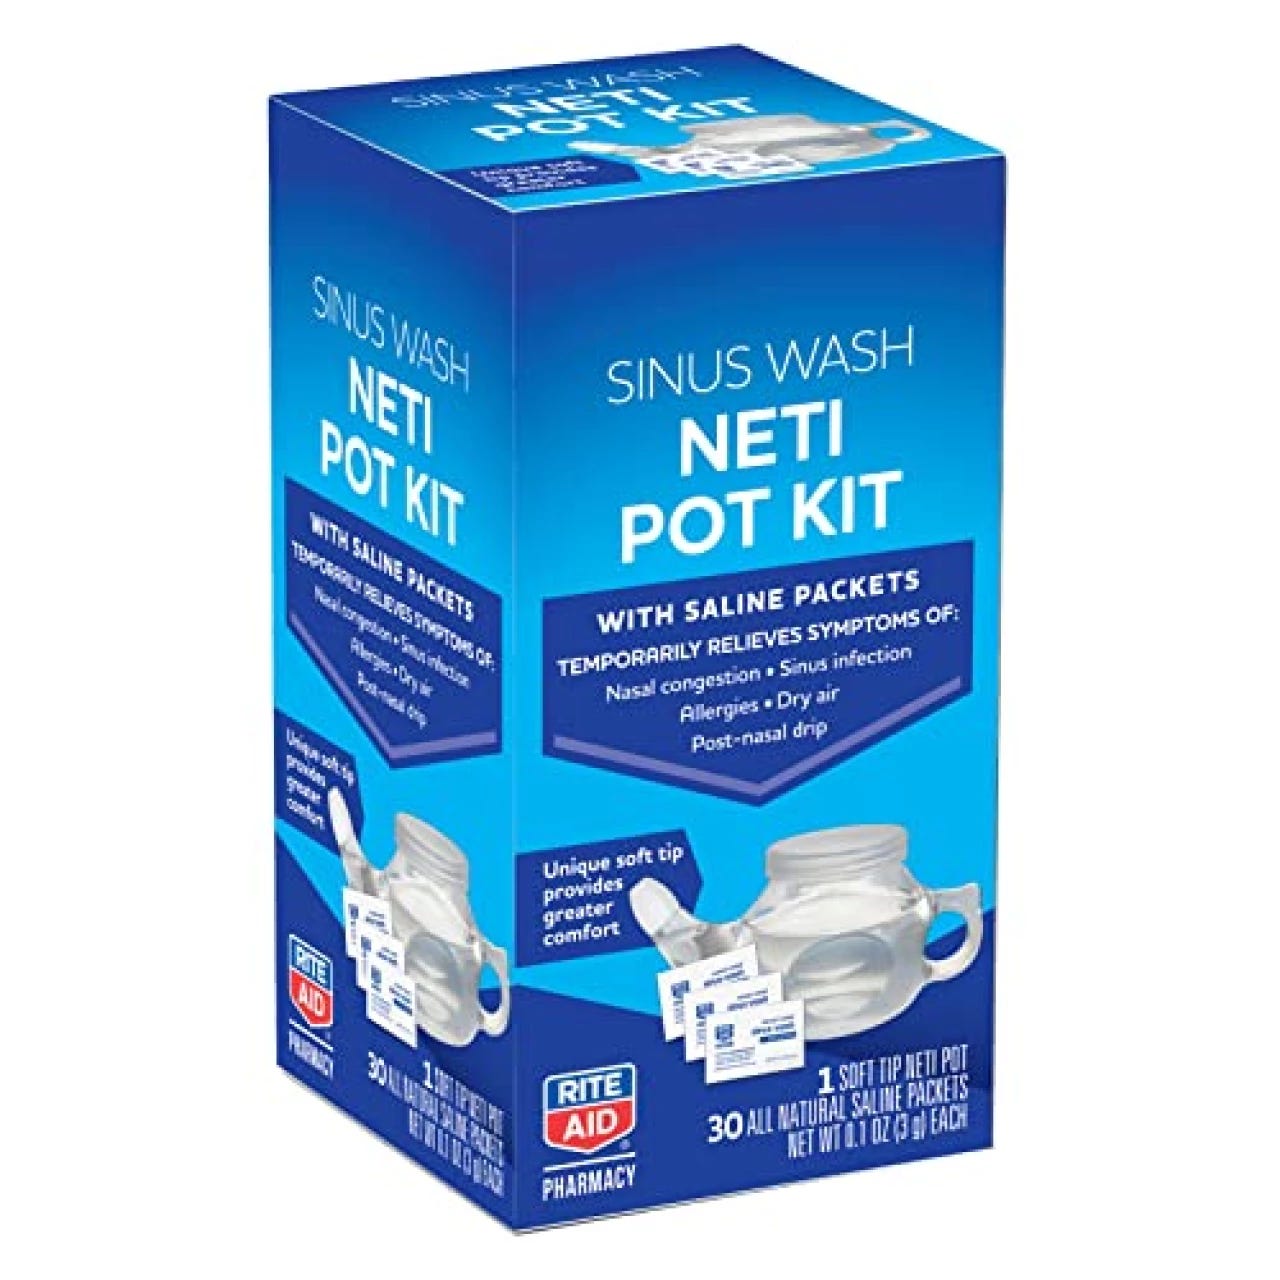 GuruNanda Arm & Hammer Neti Pot with 50 Salt Packets, Nasal Rinse Kit for  Sinus Wash, Helps Relieve Nasal Congestion & Irritation, Allergy Relief, 